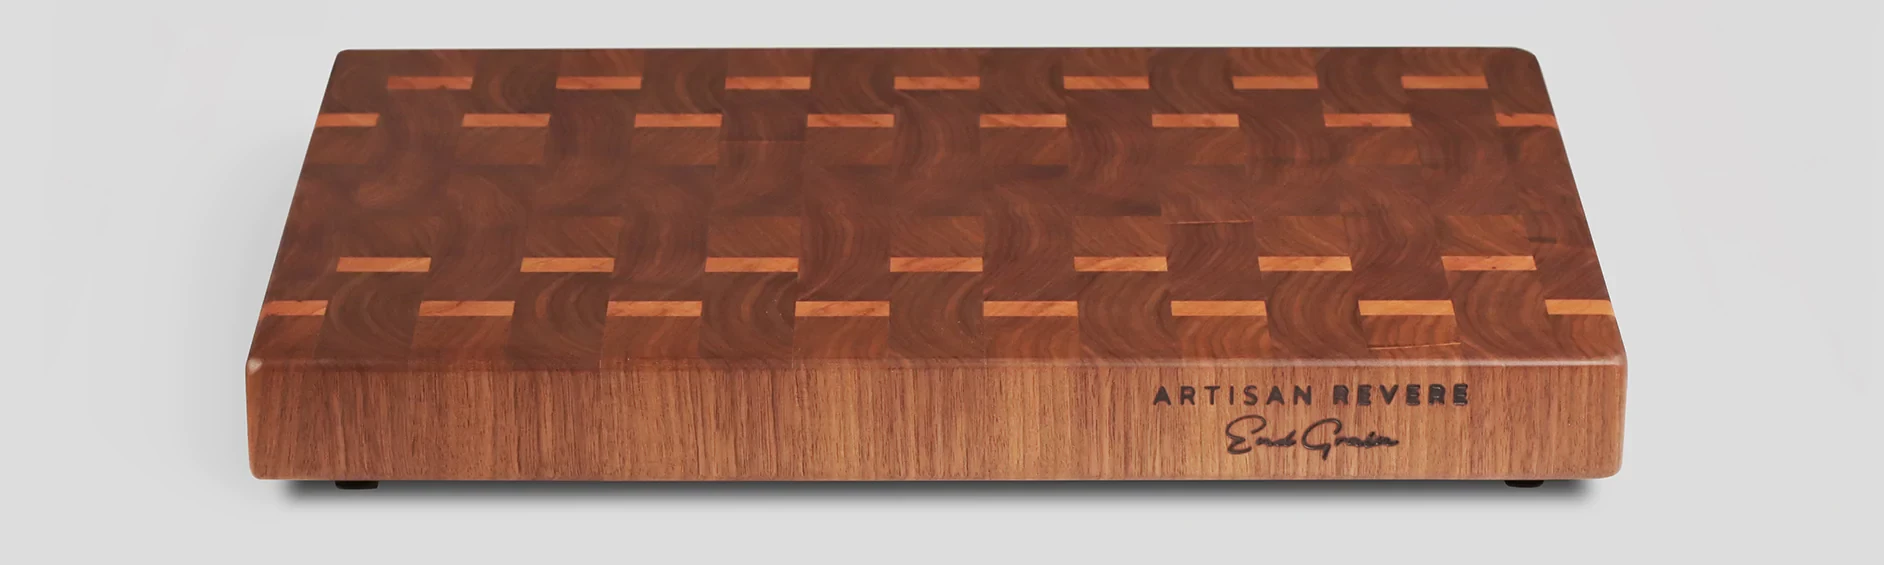 The Definitive Guide To Cutting Boards – Artisan Revere